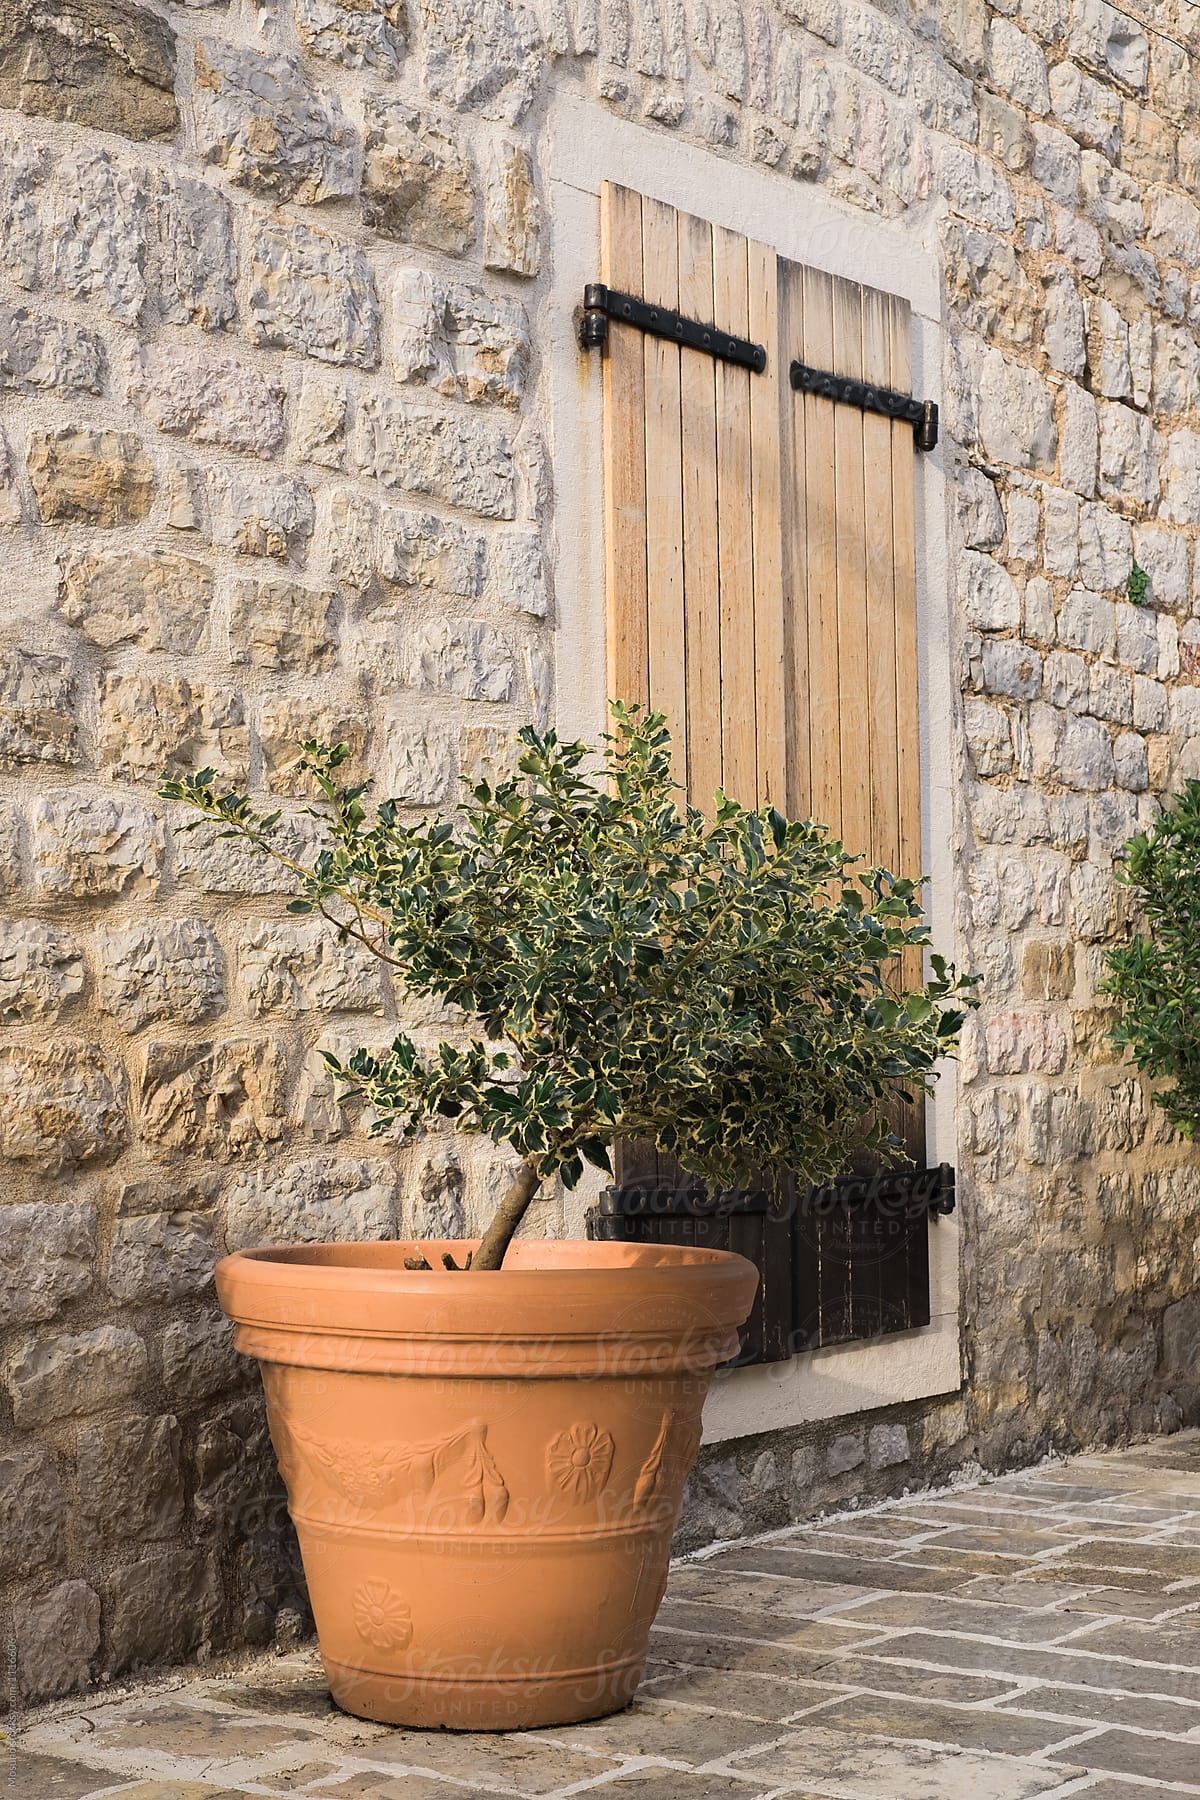 Olive Tree in a Big Flower Pot